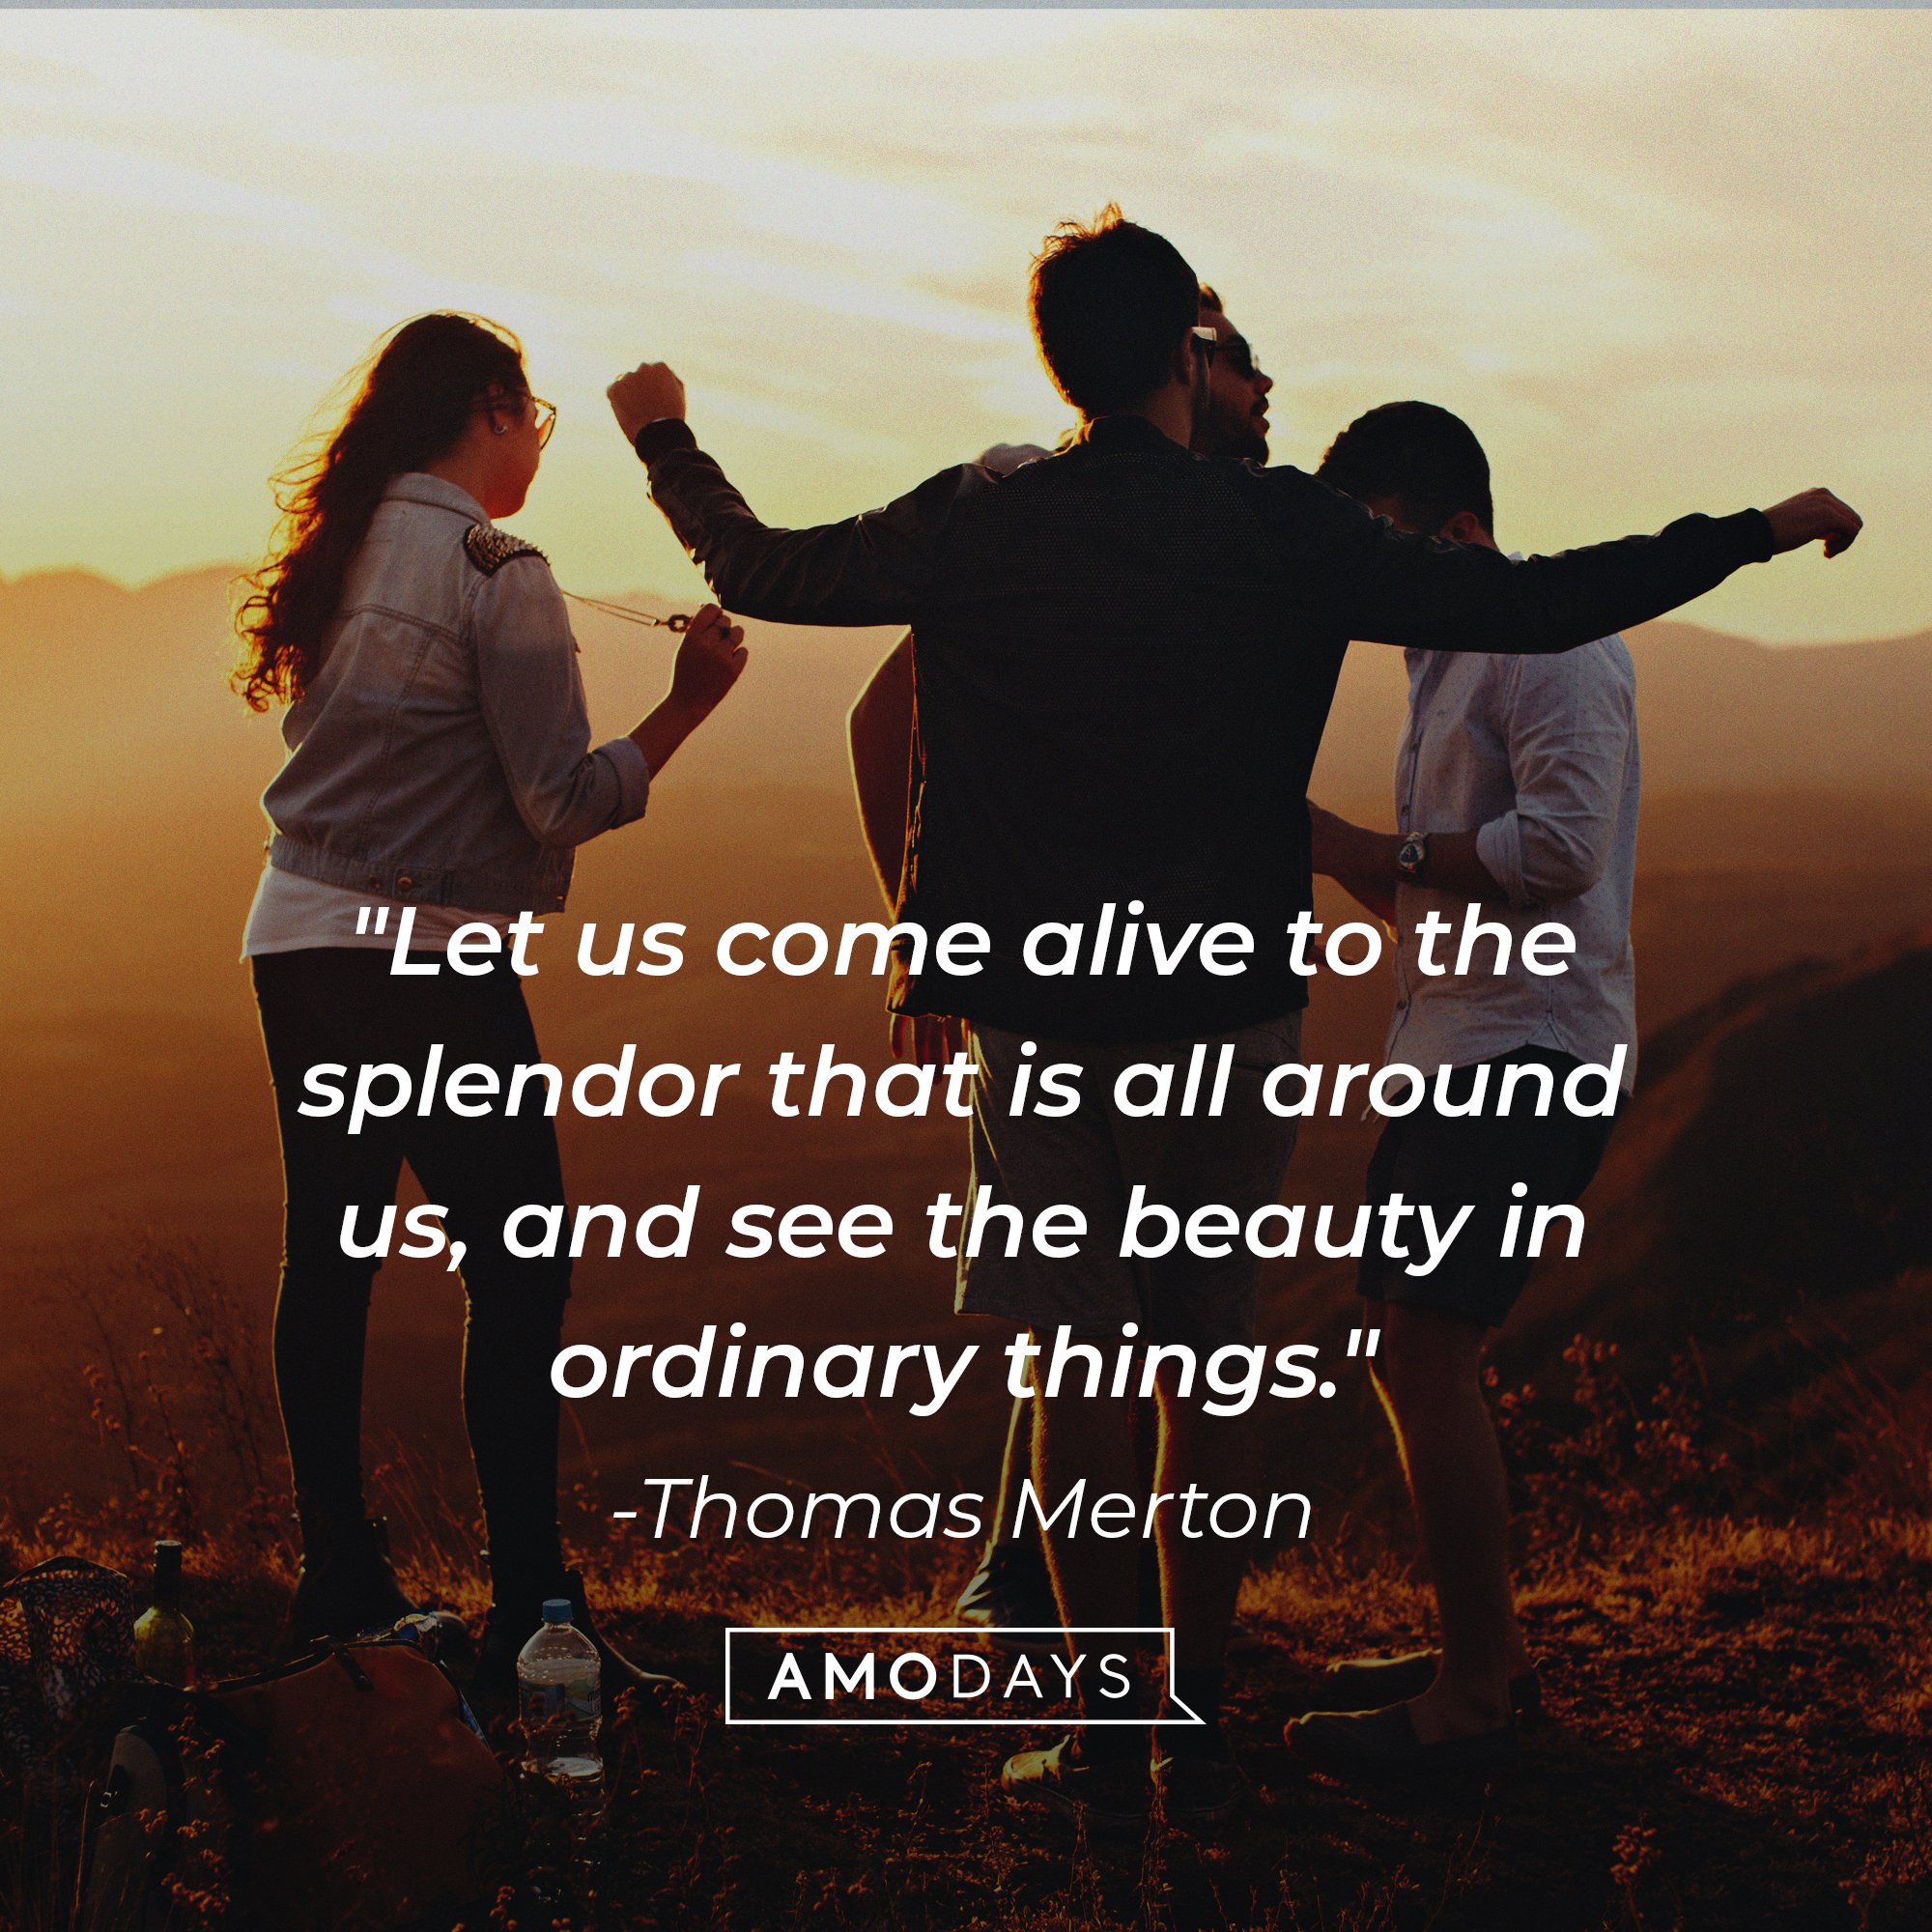 Thomas Merton’s quote: "Let us come alive to the splendor that is all around us, and see the beauty in ordinary things." | Image: AmoDays